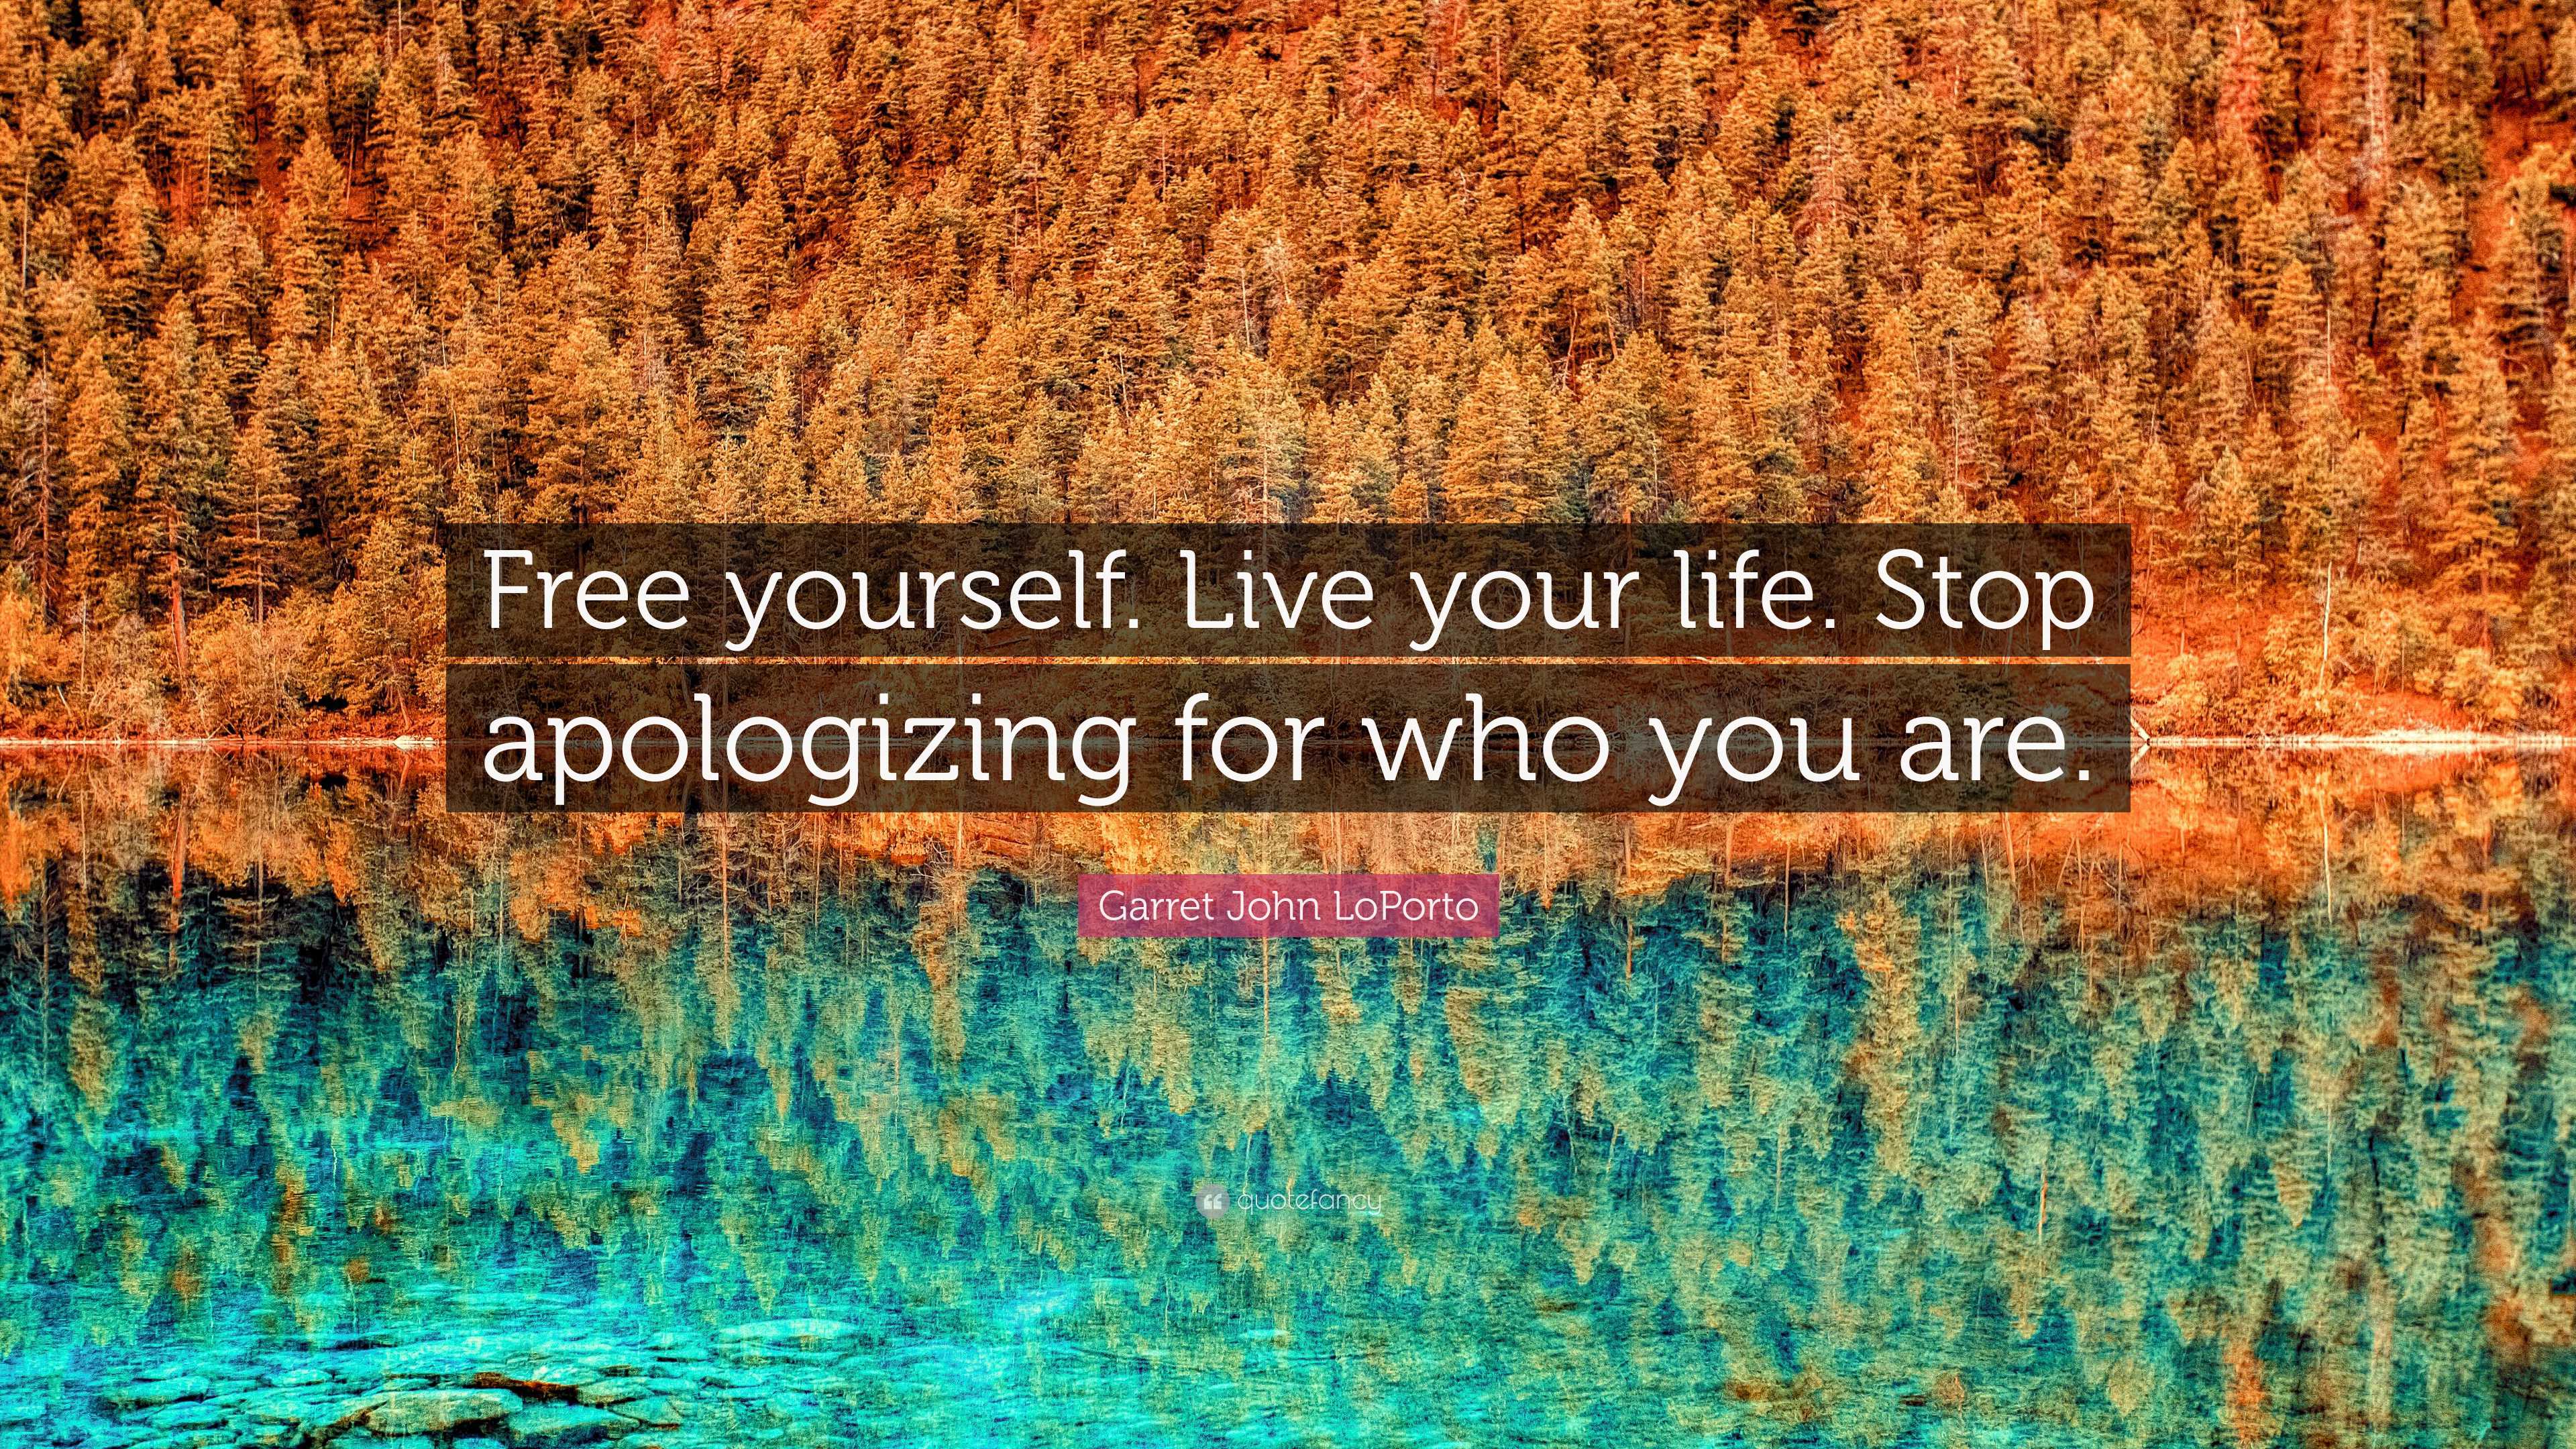 Garret John LoPorto Quote: “Free yourself. Live your life. Stop